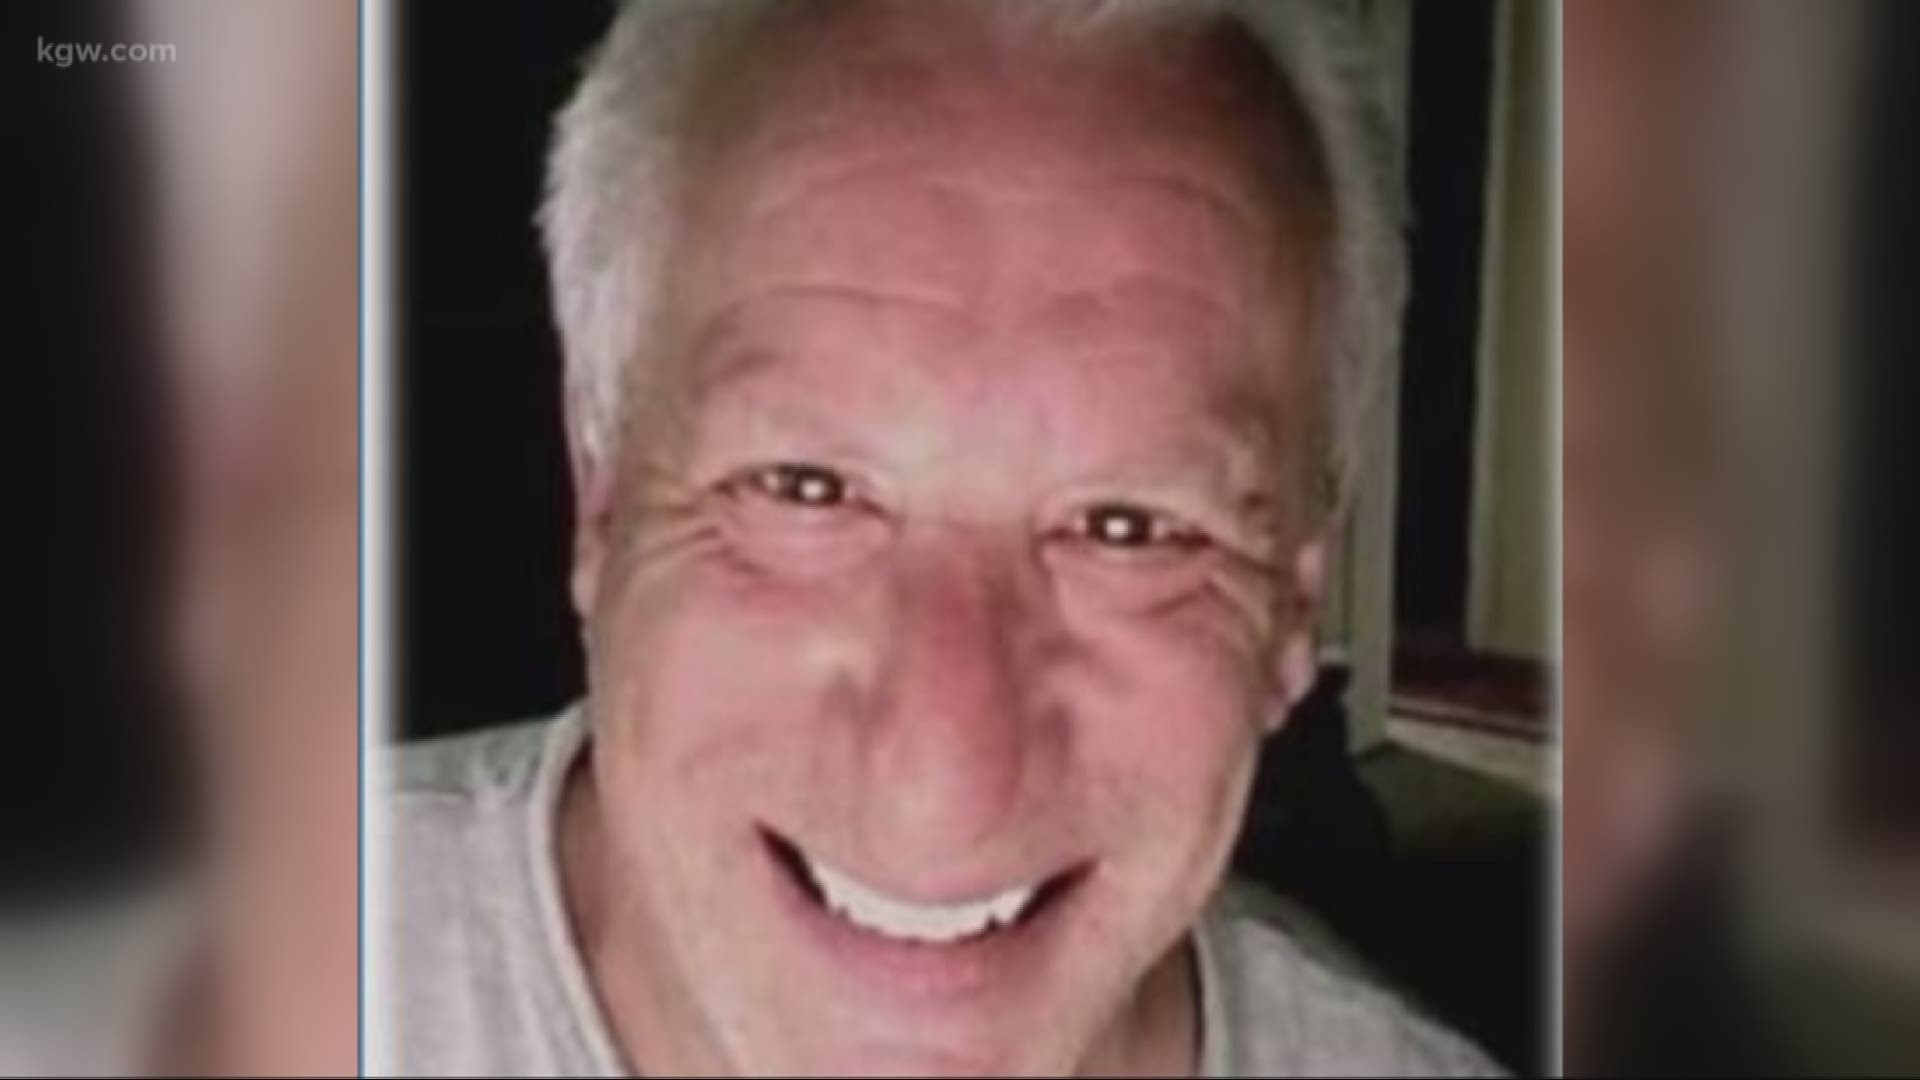 Police find remains of actor Charles Levin in Southern Oregon